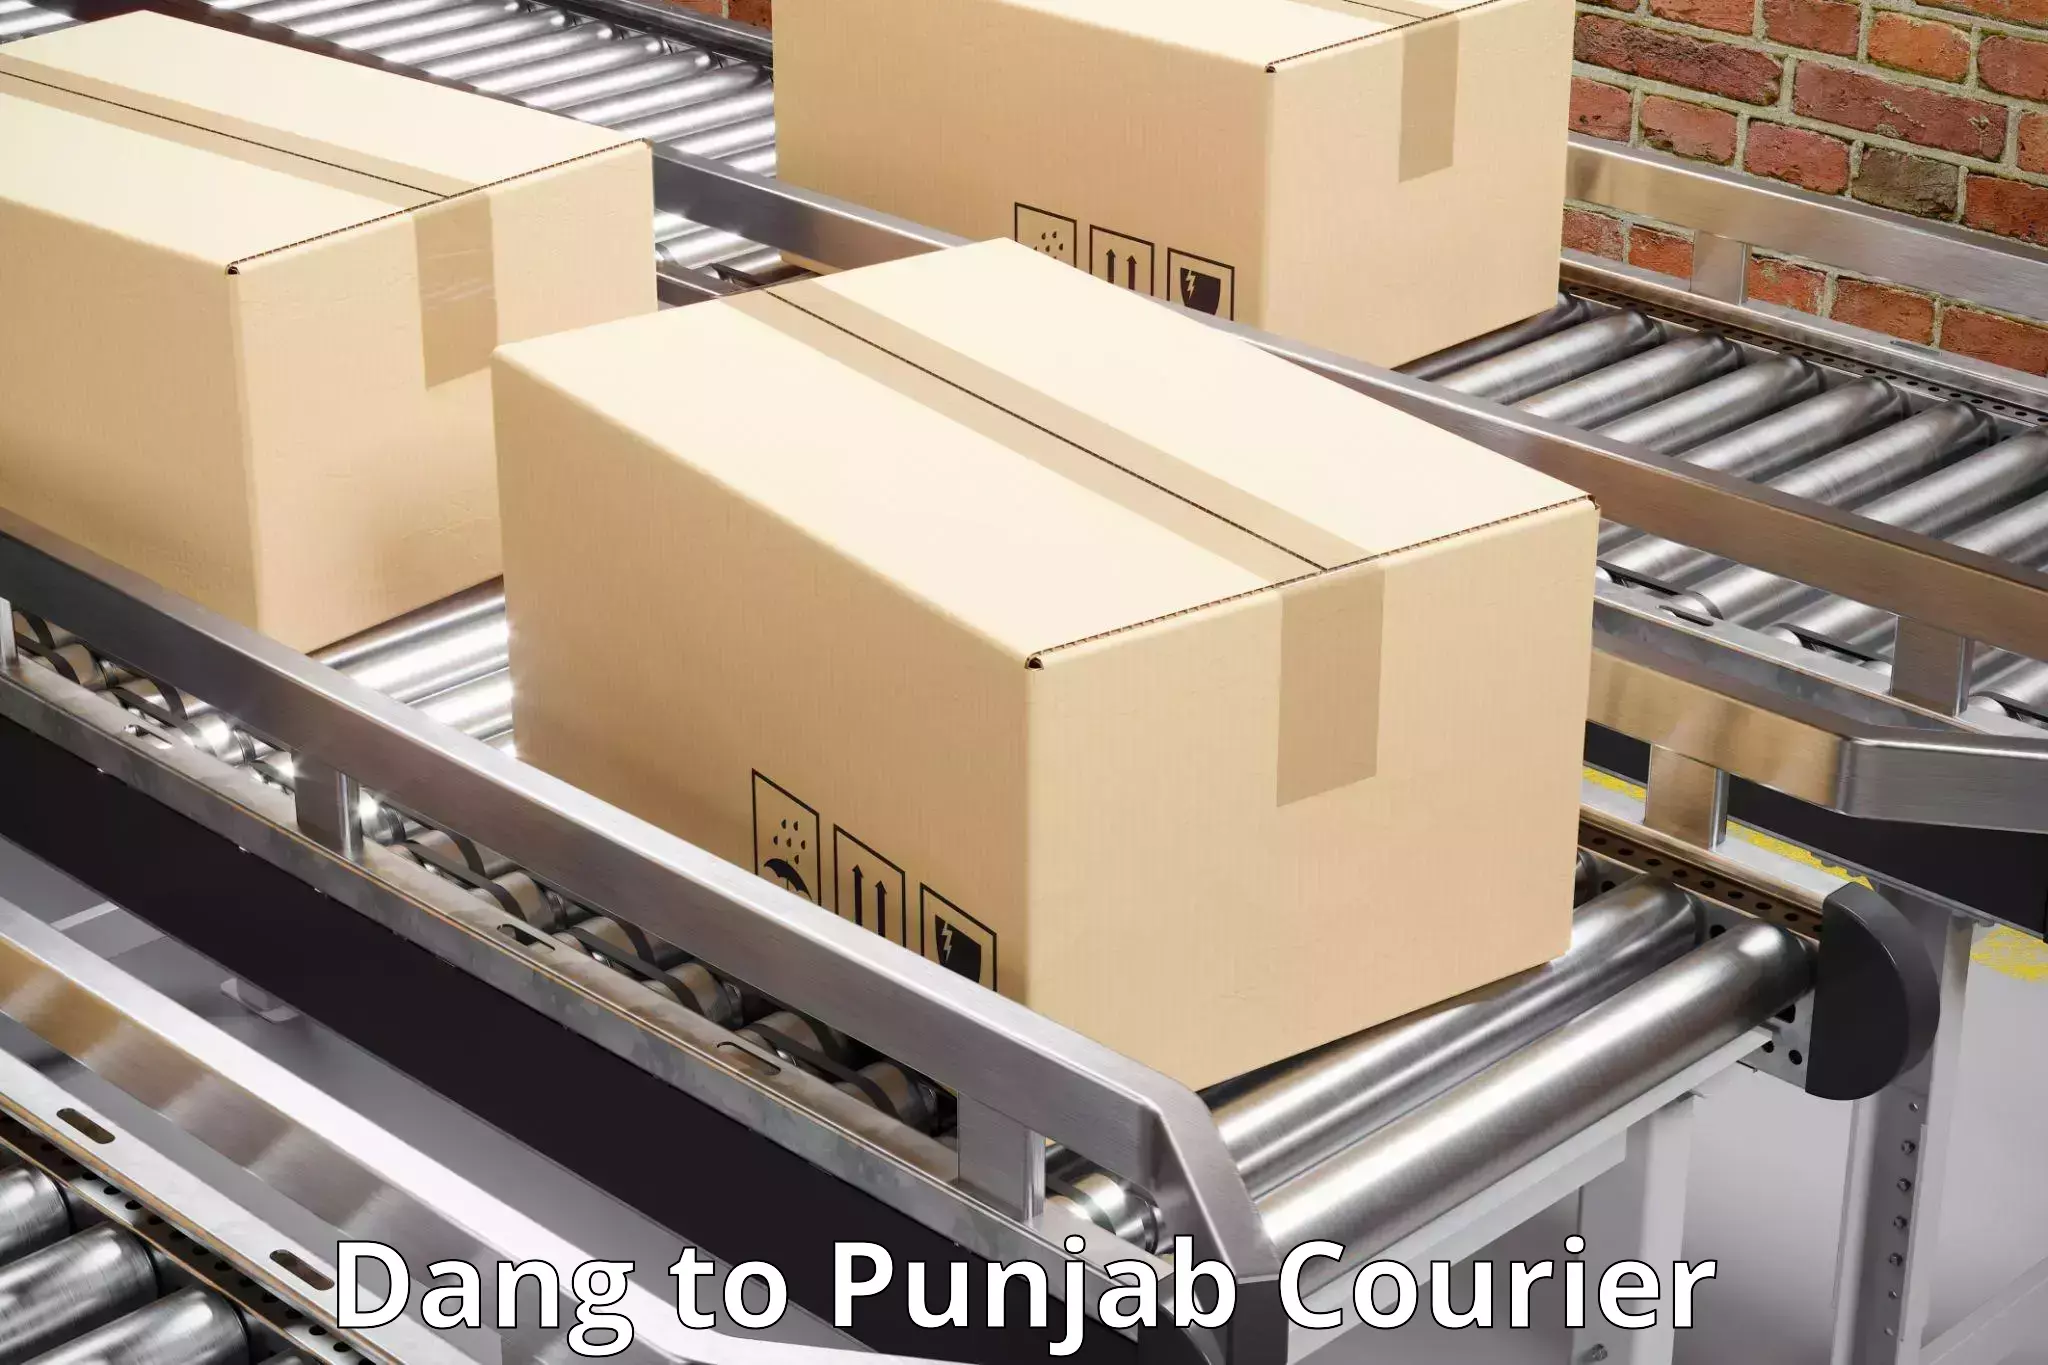 International shipping rates Dang to Sultanpur Lodhi